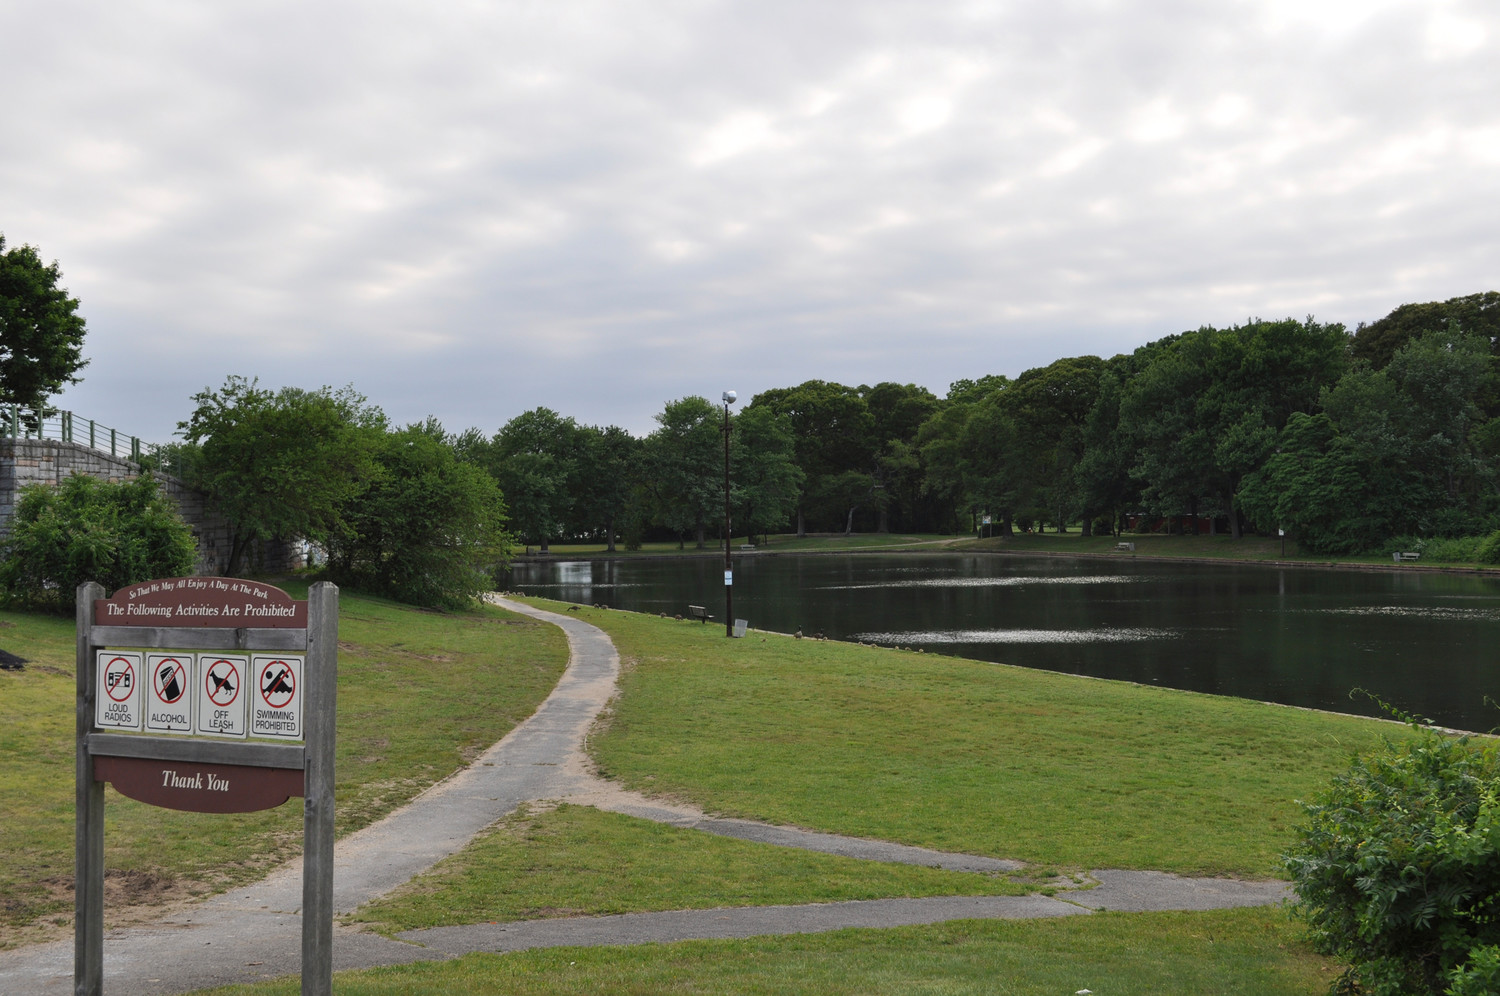 The proposed $125 million in updates for Hempstead Lake State Park include renovated trails, repaired dams, an educational center, and 48 new parking spots, among other things.